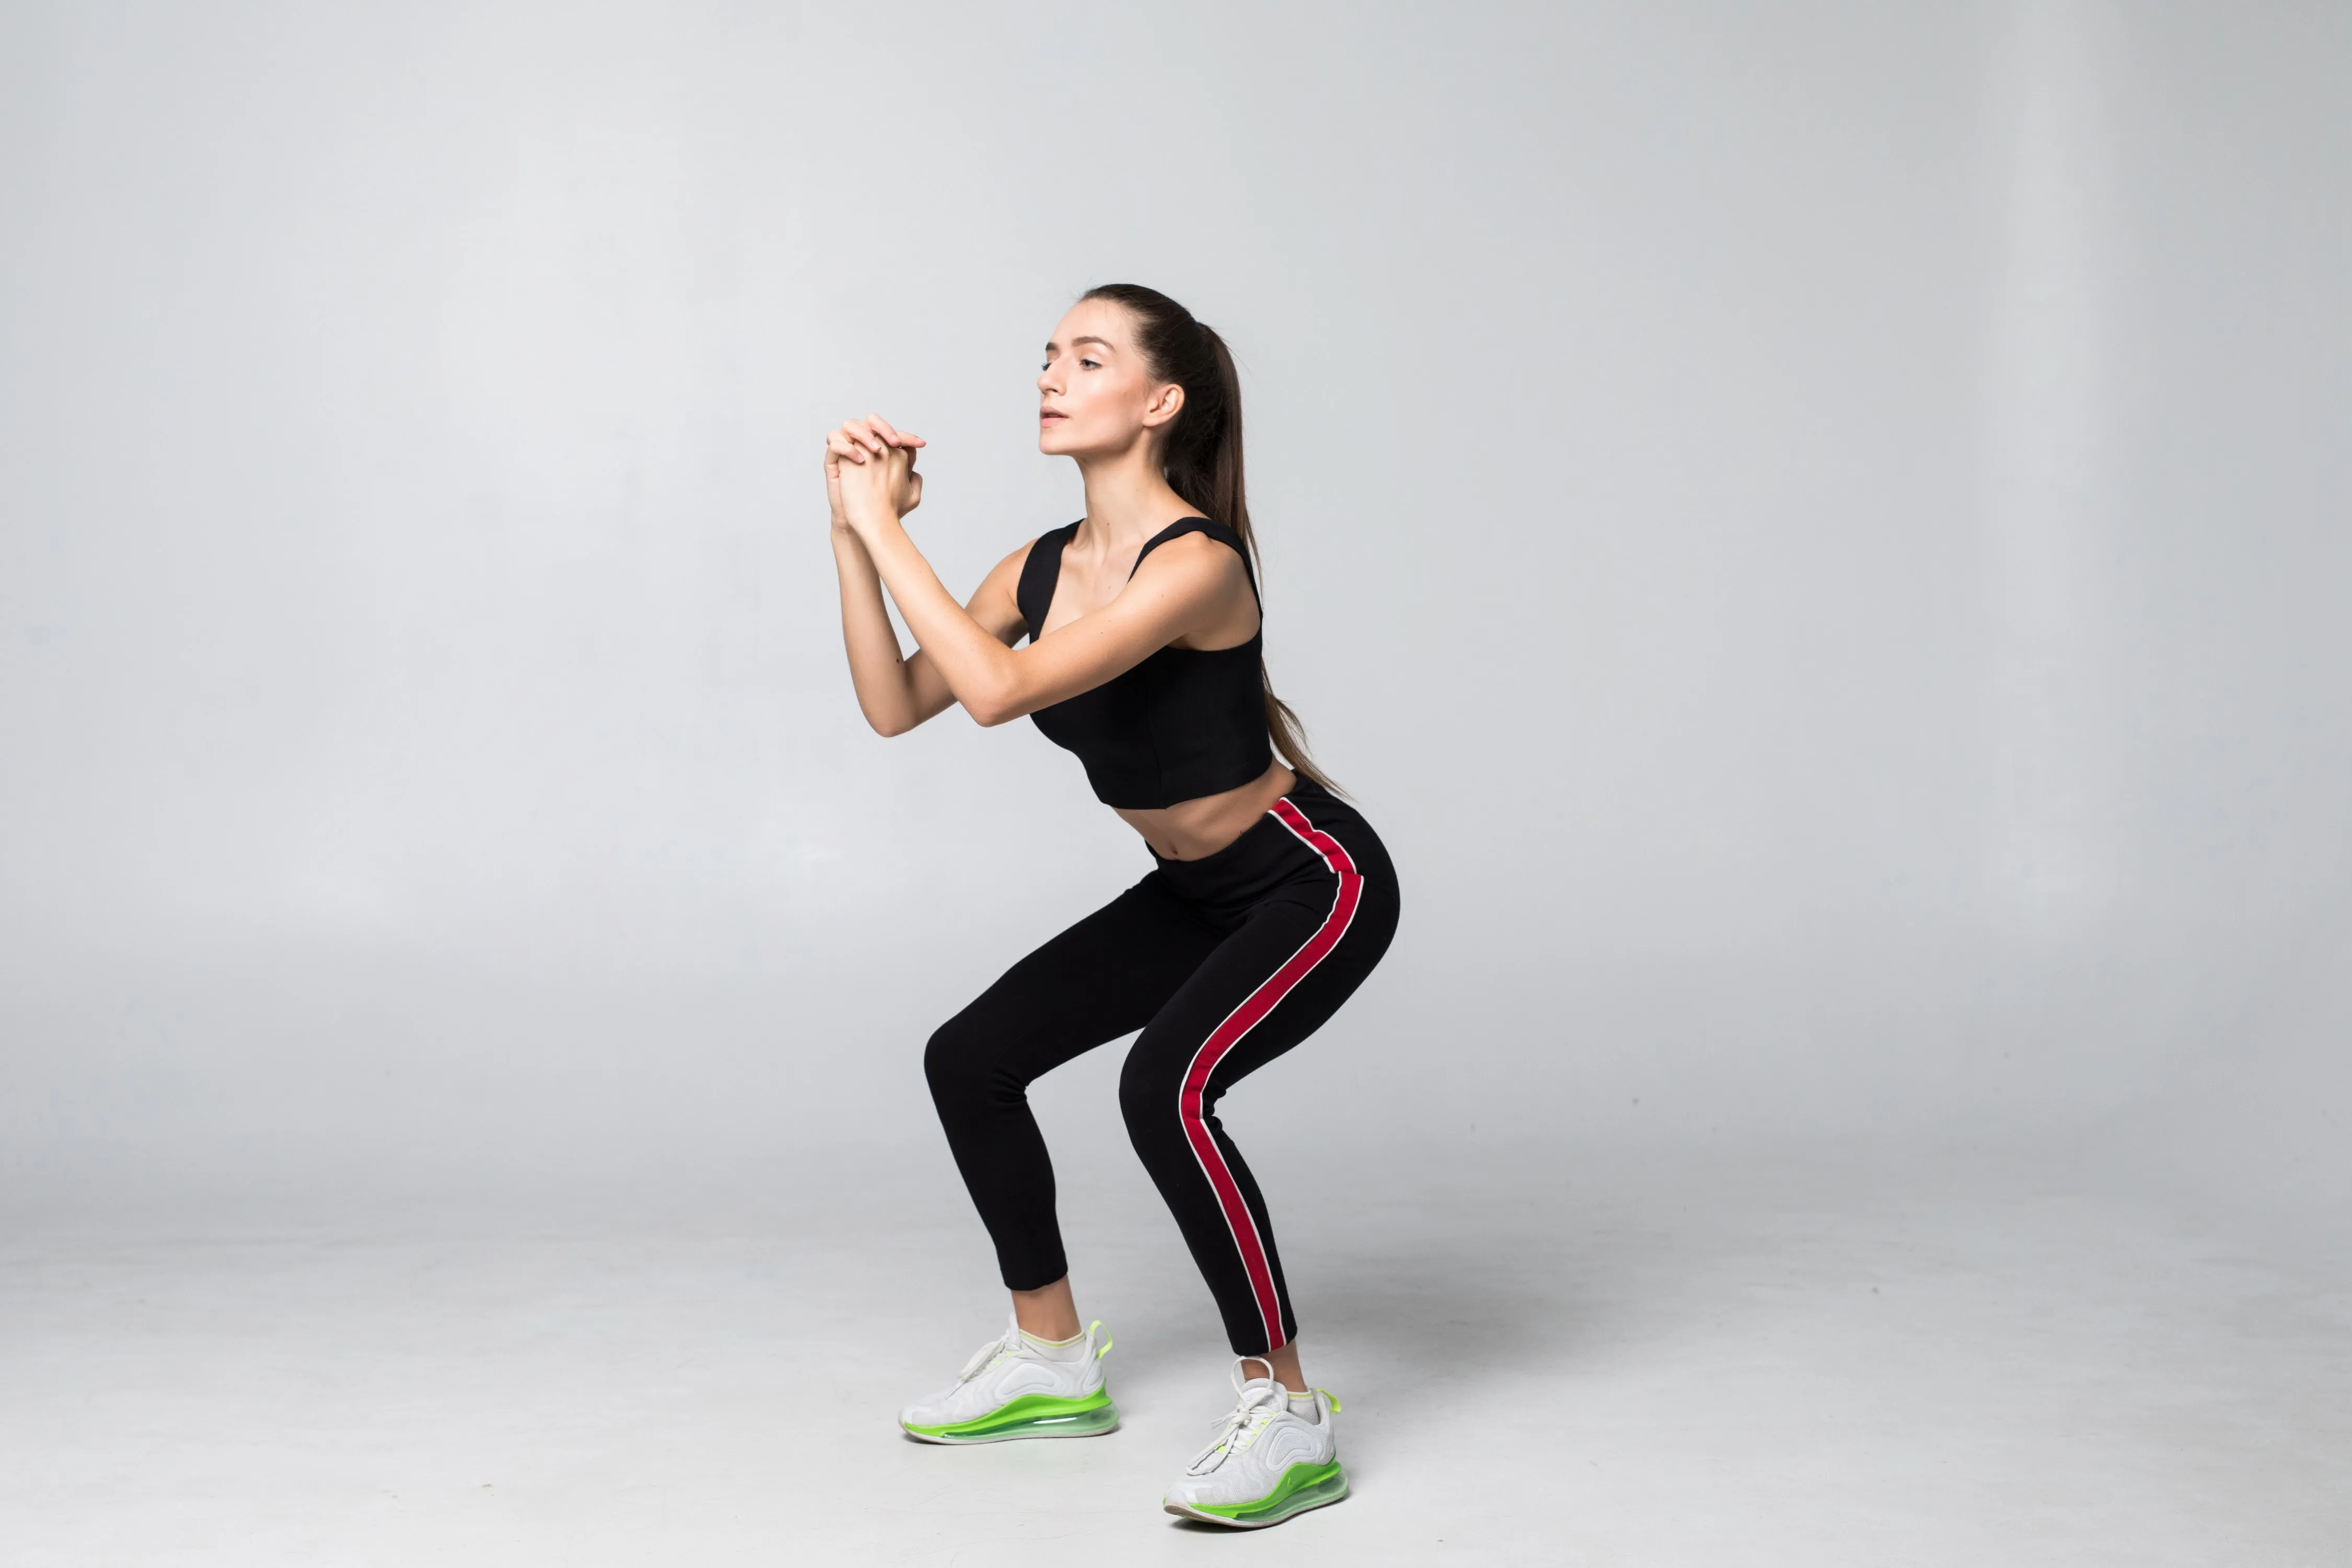 How Many Squats Should You do To Maximize Fitness Goals?